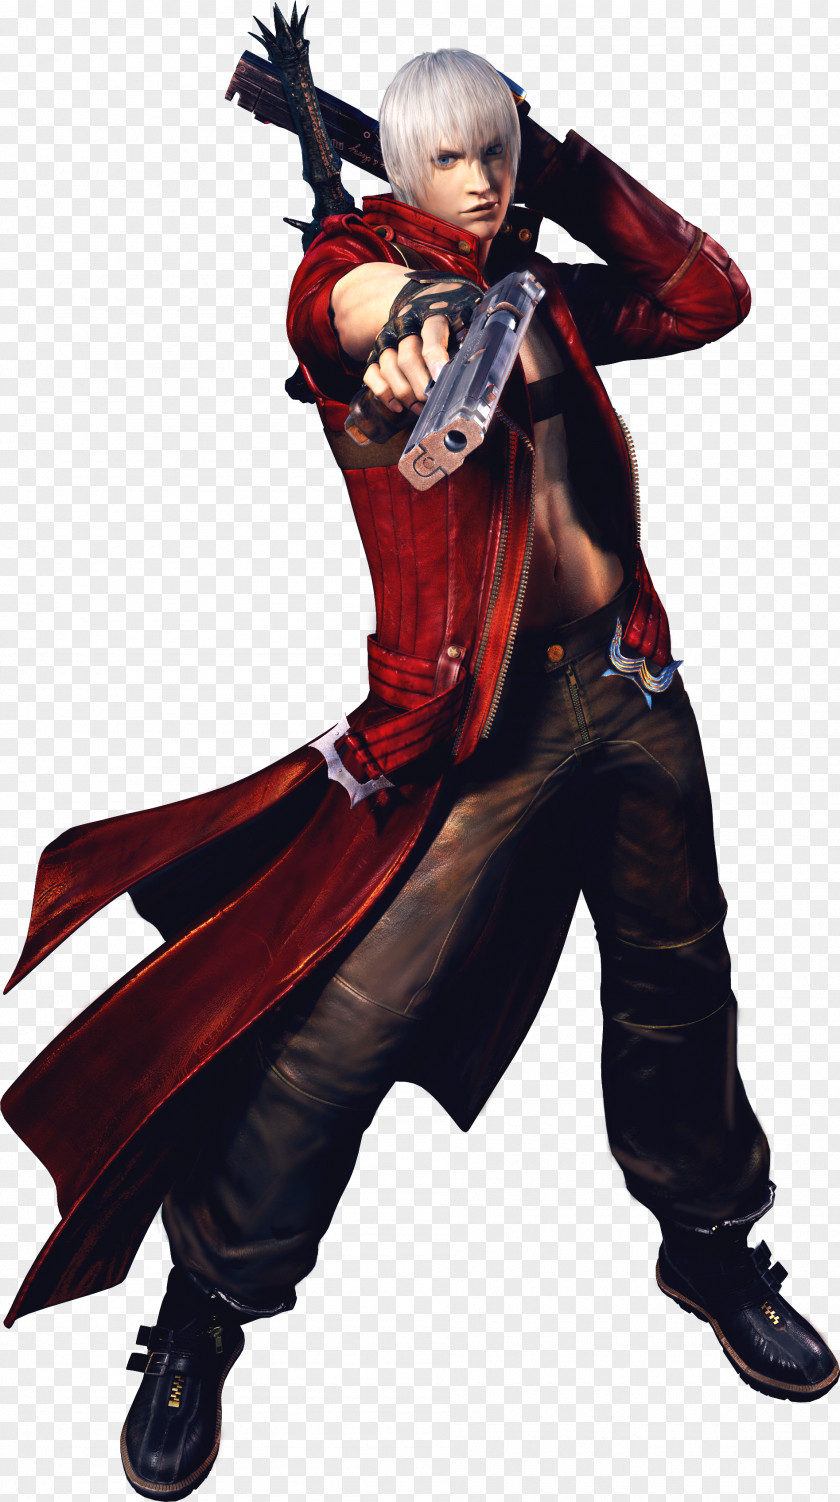 Ra Devil May Cry 3: Dante's Awakening DmC: 2 Cry: The Animated Series PNG